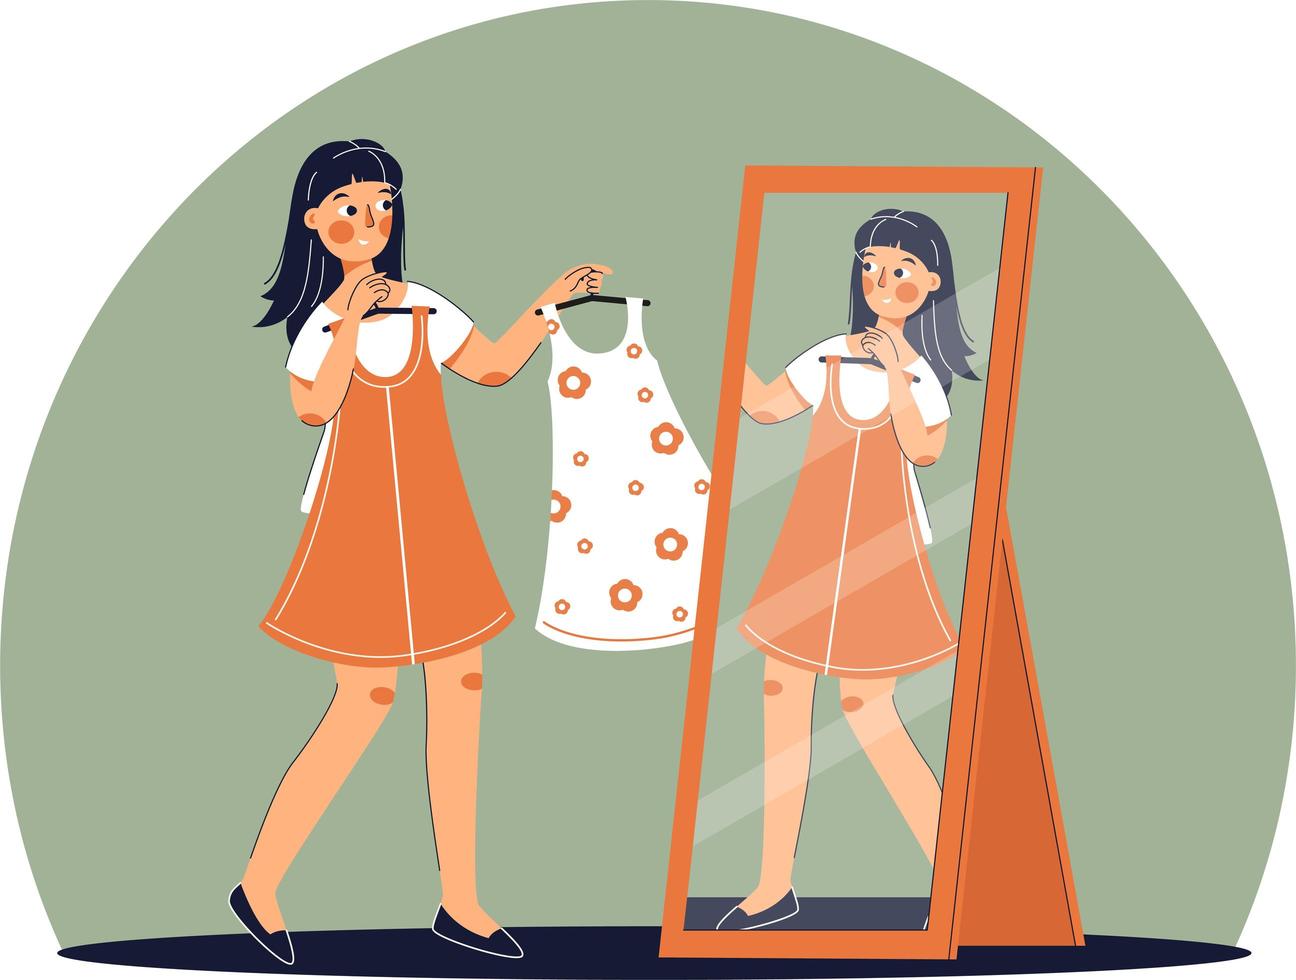 Girl trying on dress in clothing store. Shopping vector